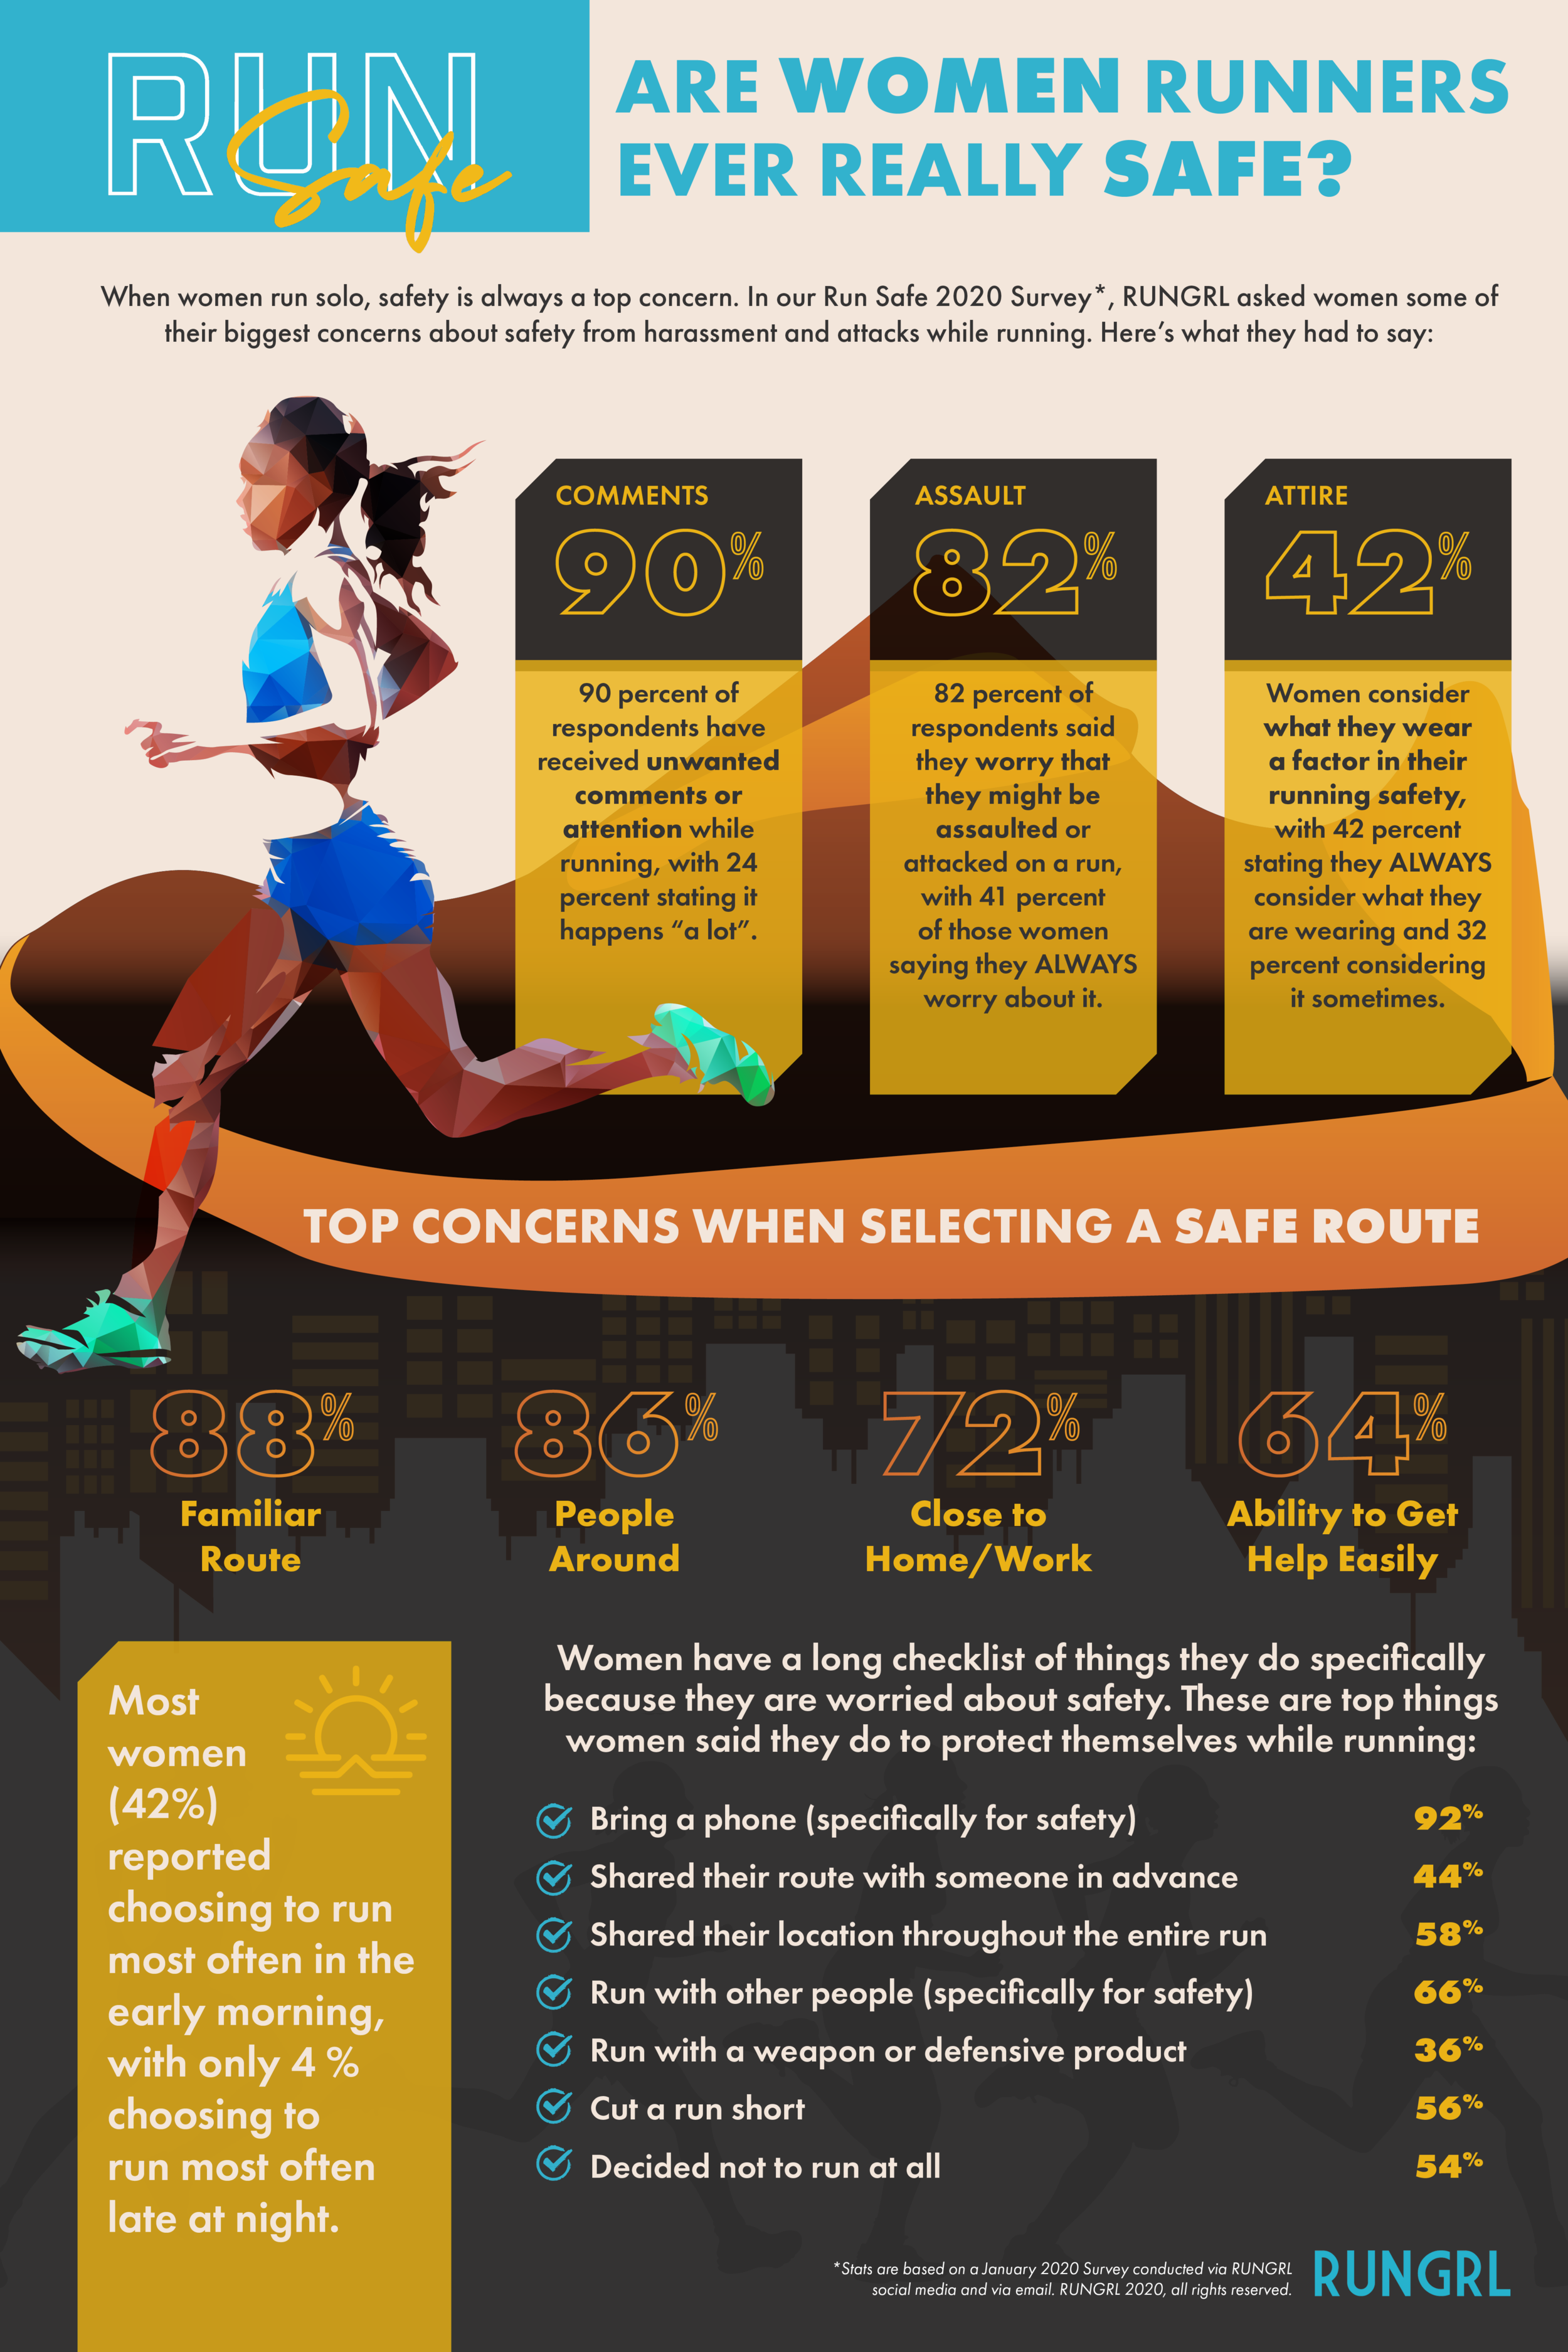 How to Start Running: Top Tips, Running Programs, and Safety